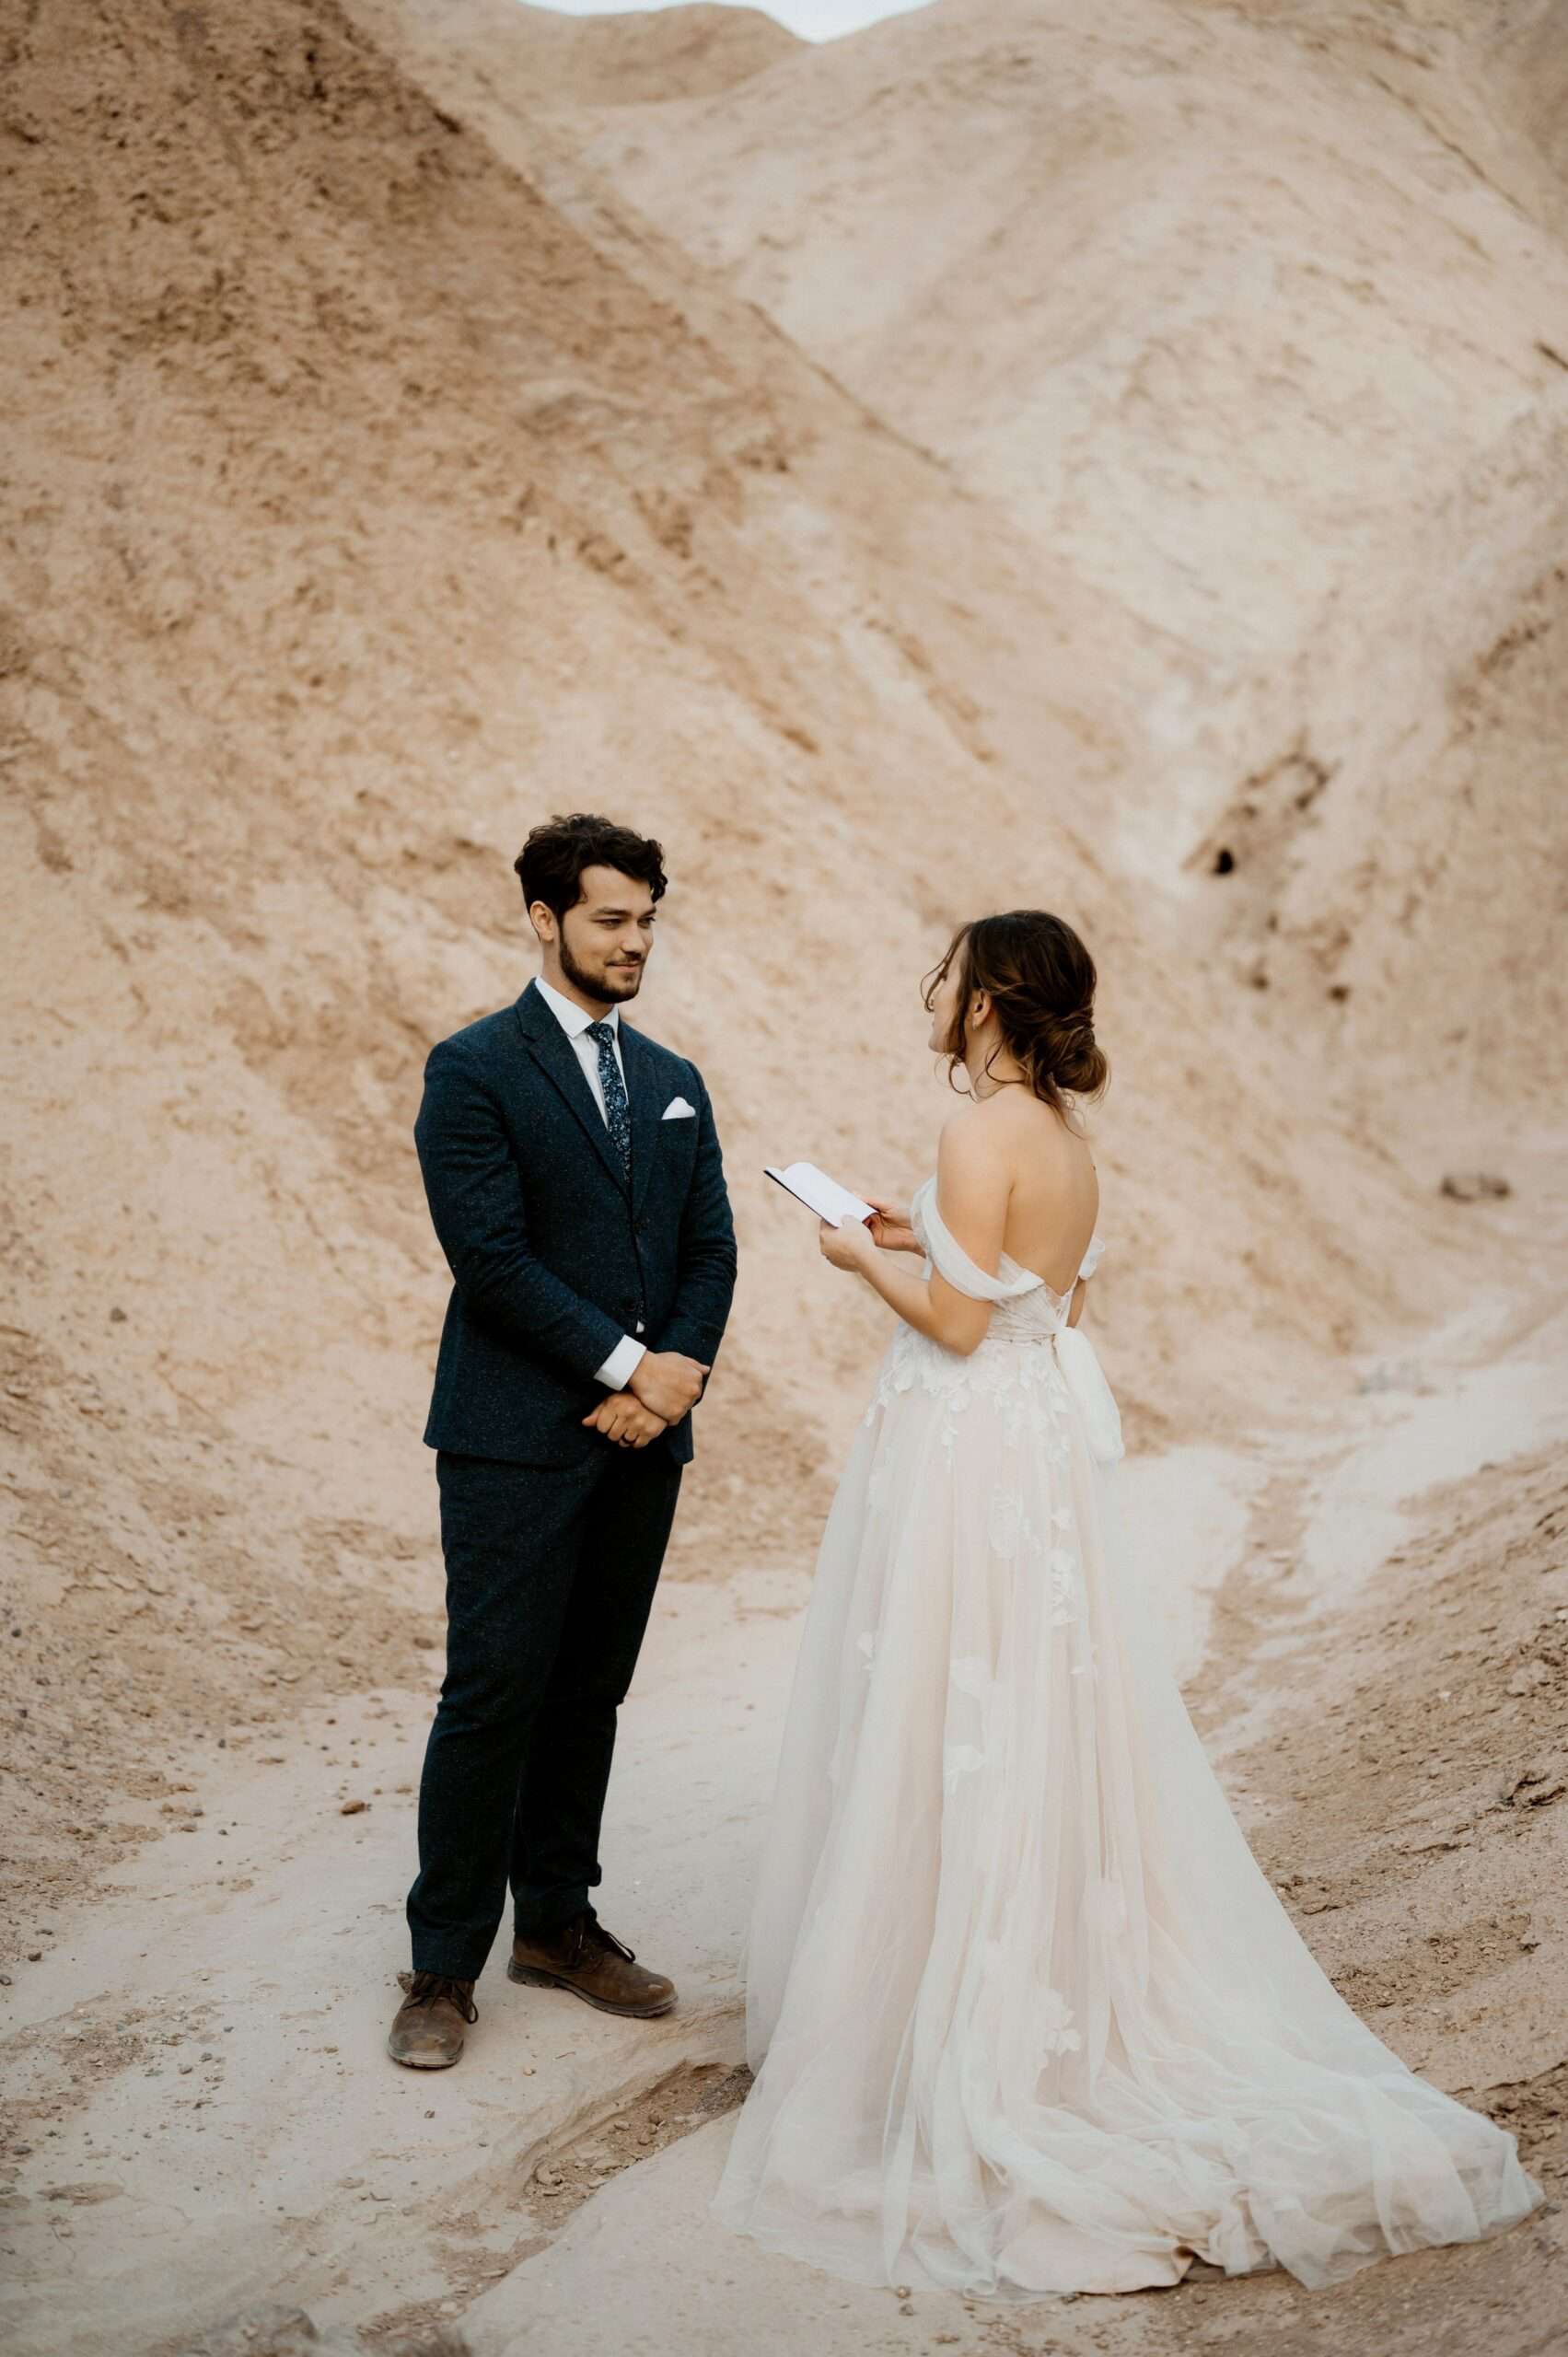 creative ways to make your elopement special